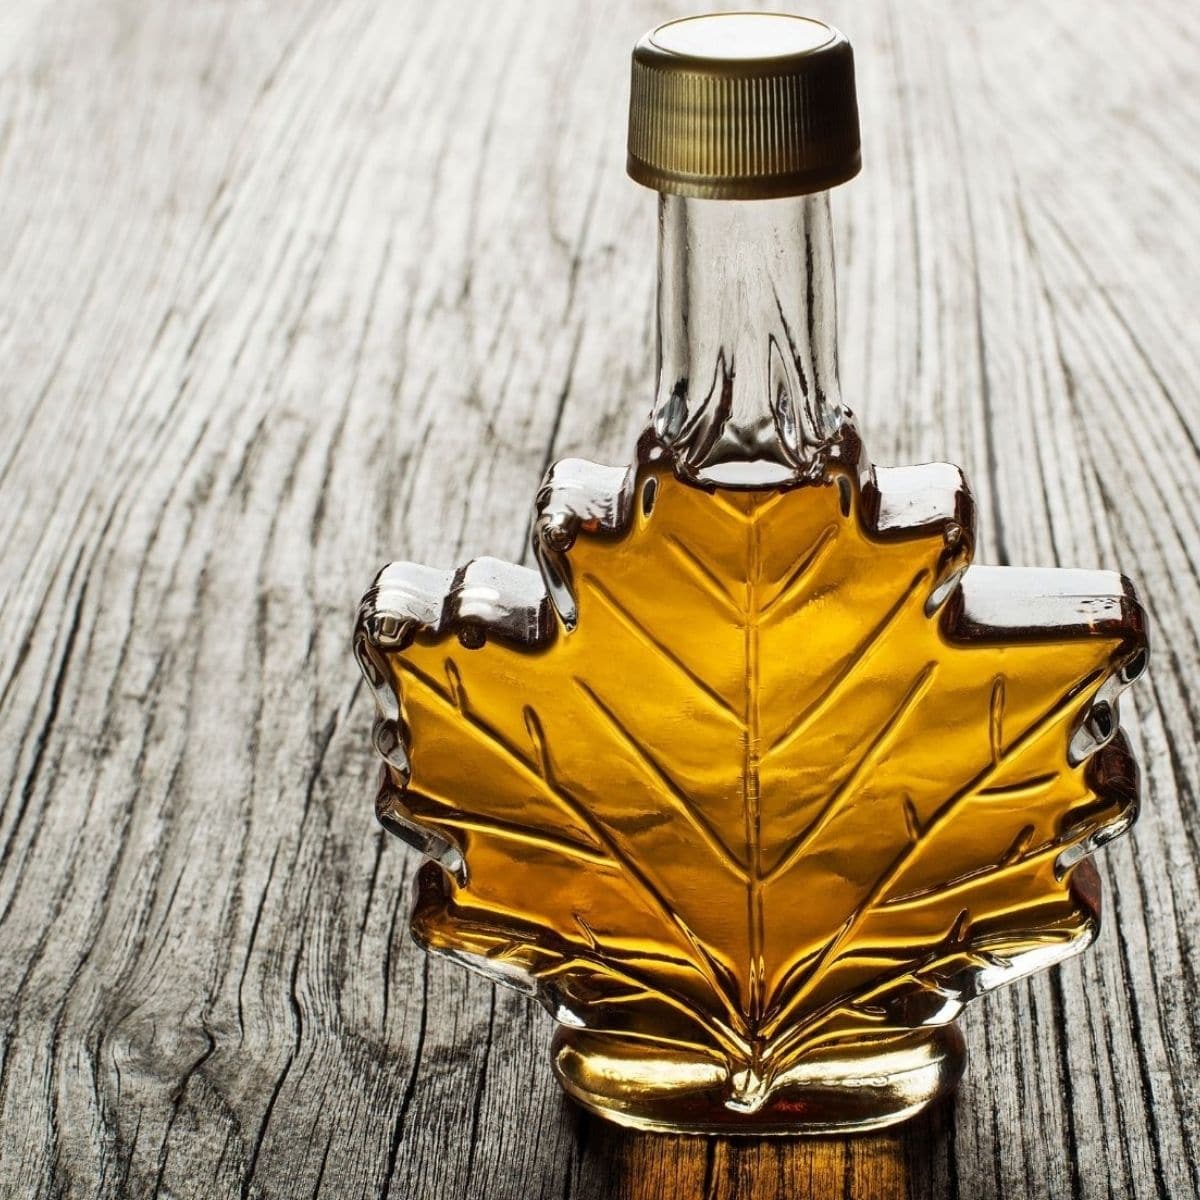 Best maple syrup ideas and alternatives to use in any recipe.